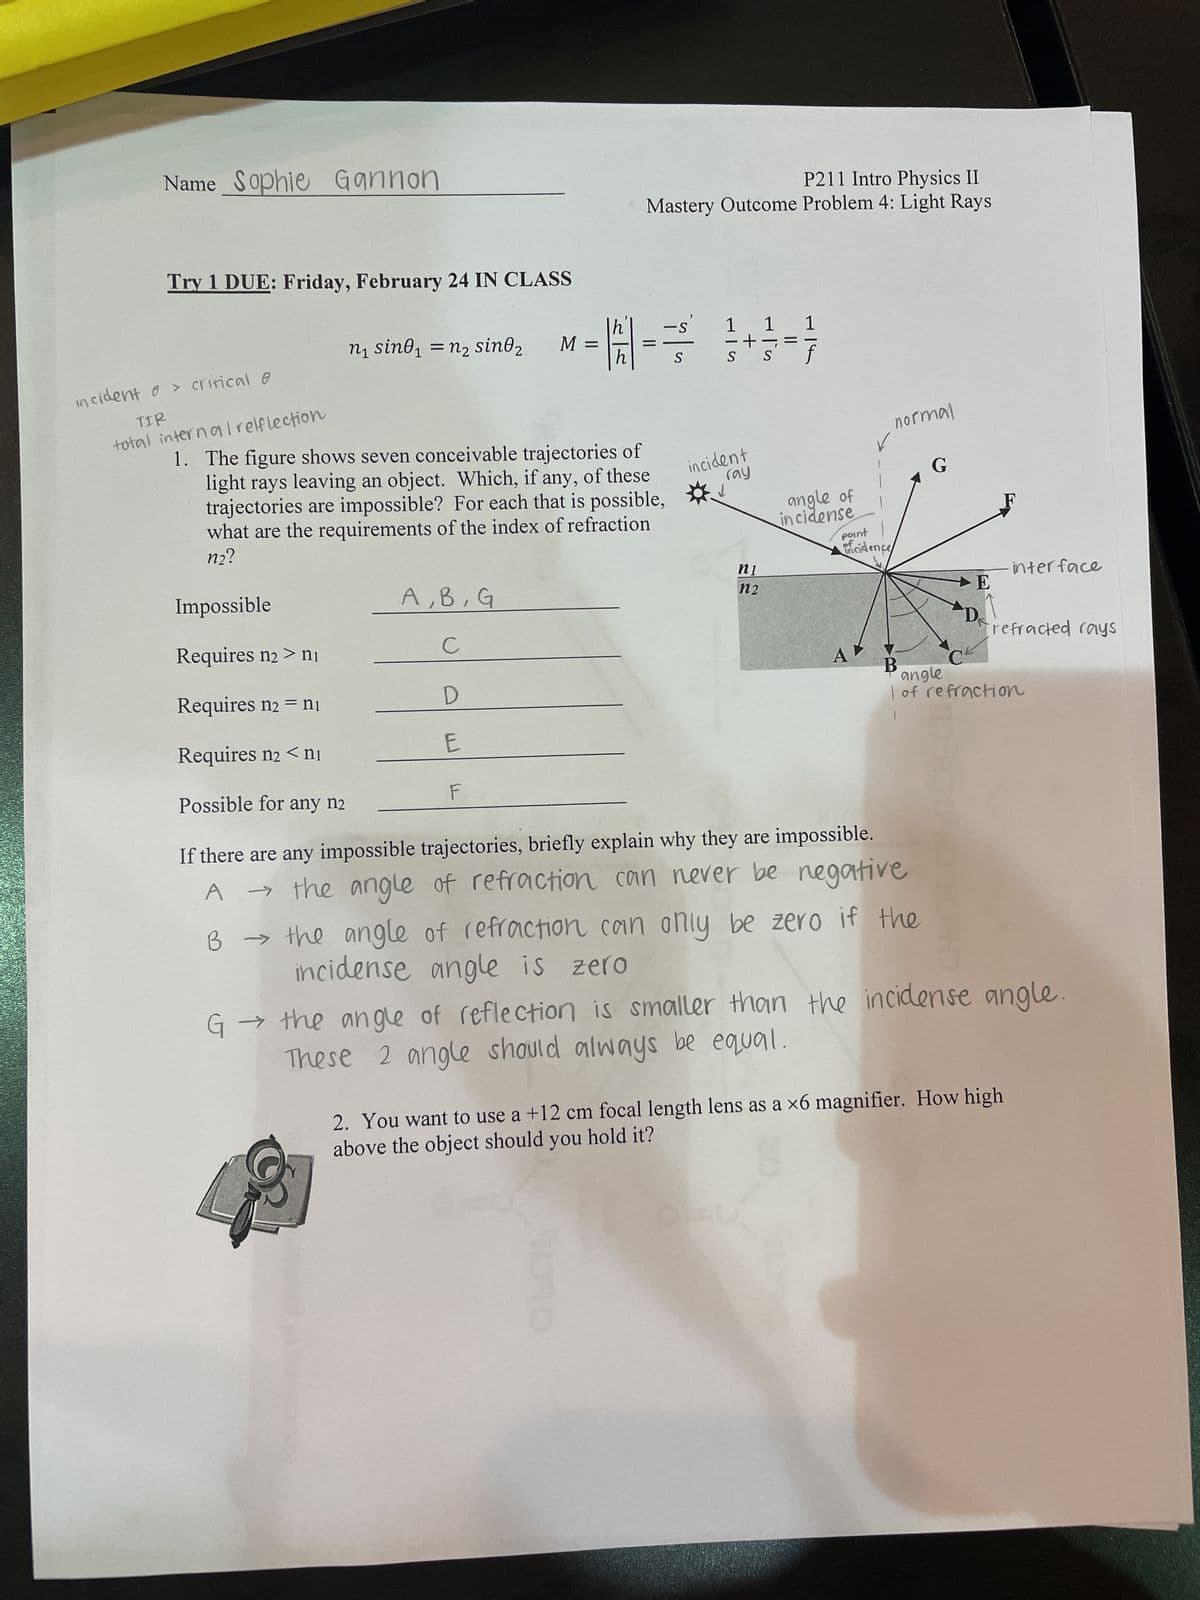 Name Sophie Gannon
Try 1 DUE: Friday, February 24 IN CLASS
incident o > critical @
TIR
total internal reflection
n₁ sino₁ = n² sin0₂
A, B, G
с
D
E
M =
F
h
P211 Intro Physics II
Mastery Outcome Problem 4: Light Rays
=
-S
S
1
S S
1. The figure shows seven conceivable trajectories of
light rays leaving an object. Which, if any, of these
trajectories are impossible? For each that is possible,
what are the requirements of the index of refraction
n2?
Impossible
Requires n₂ > ni
Requires n₂ = n₁
Requires n₂ <ni
Possible for any n2
If there are any impossible trajectories, briefly explain why they are impossible.
→ the angle of refraction can never be negative
A
1 1
s' f
incident
ray
↓
ni
n2
normal
angle of
incidense
point
ofcidence
G
B → the angle of refraction can only be zero if the
incidense angle is zero
E
D
interface
frefracted rays
C
angle
I of refraction
G→
the angle of reflection is smaller than the incidense angle.
These 2 angle should always be equal.
2. You want to use a +12 cm focal length lens as a x6 magnifier. How high
above the object should you hold it?